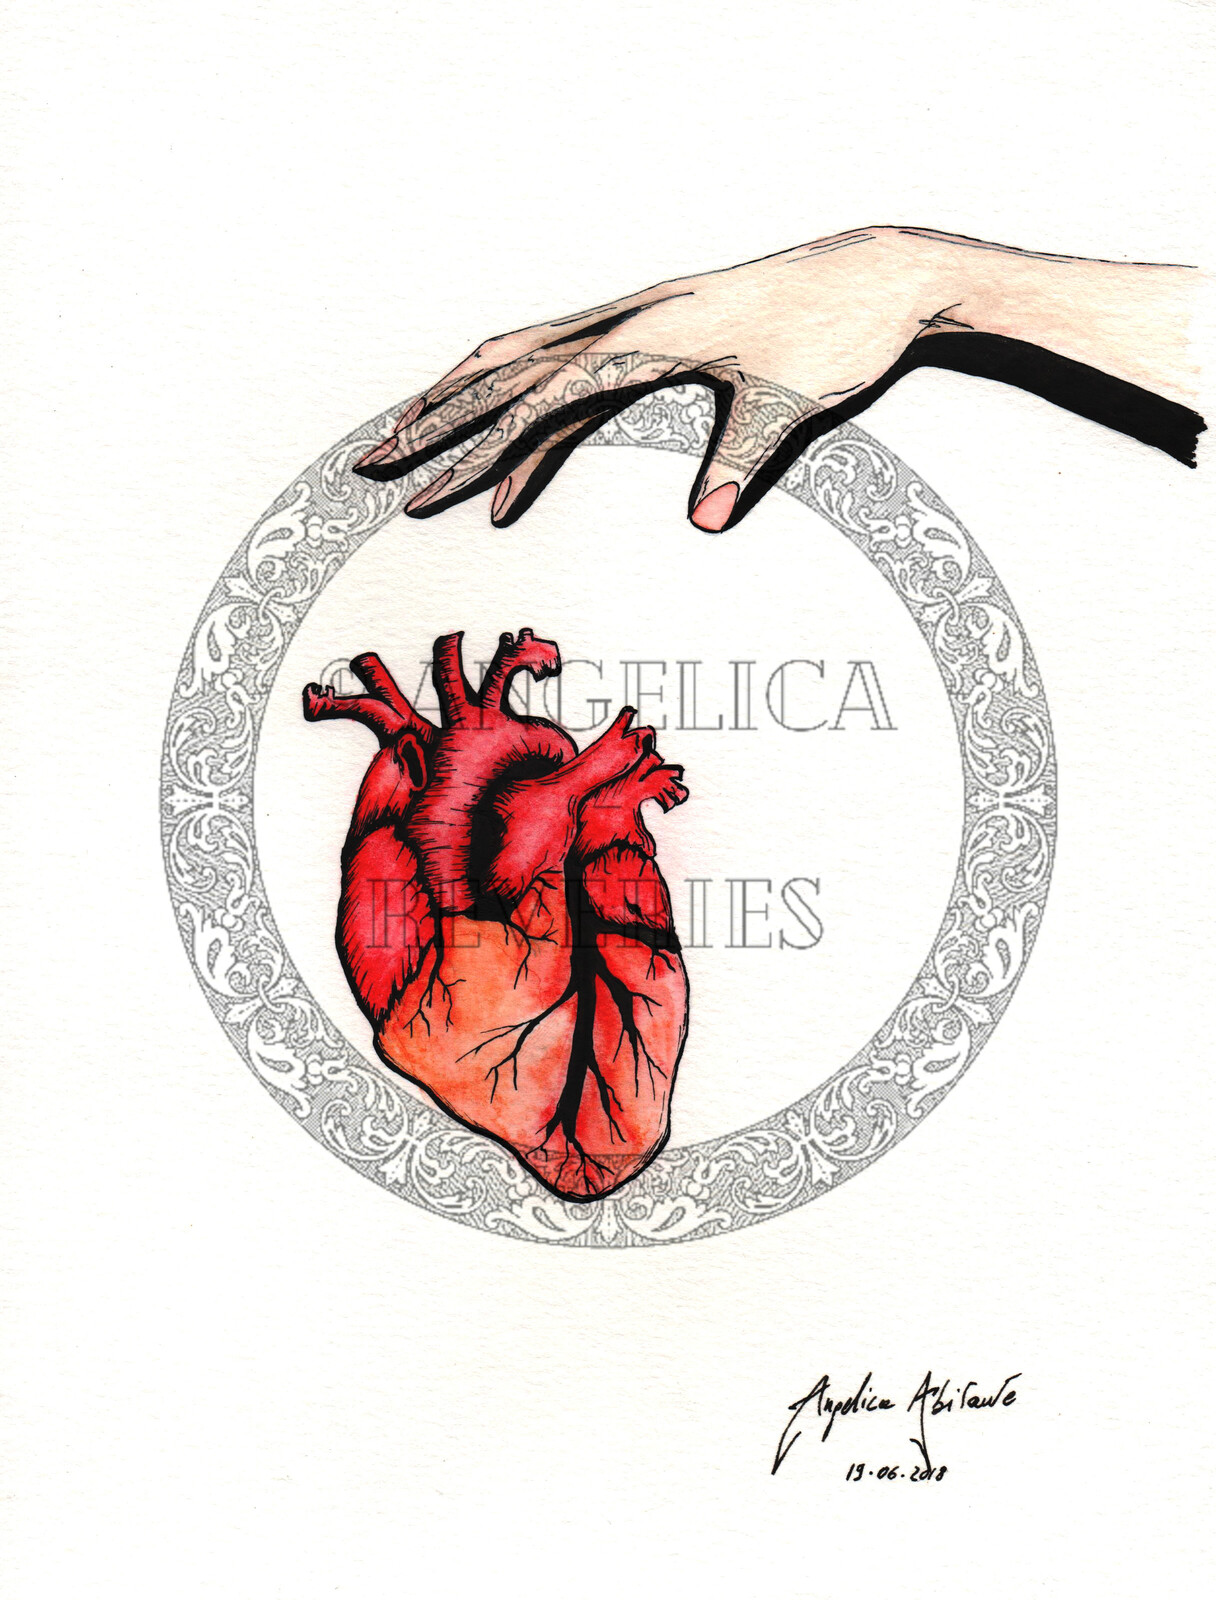 "Life"
Anatomical heart study #1
Inks and watercolors.
